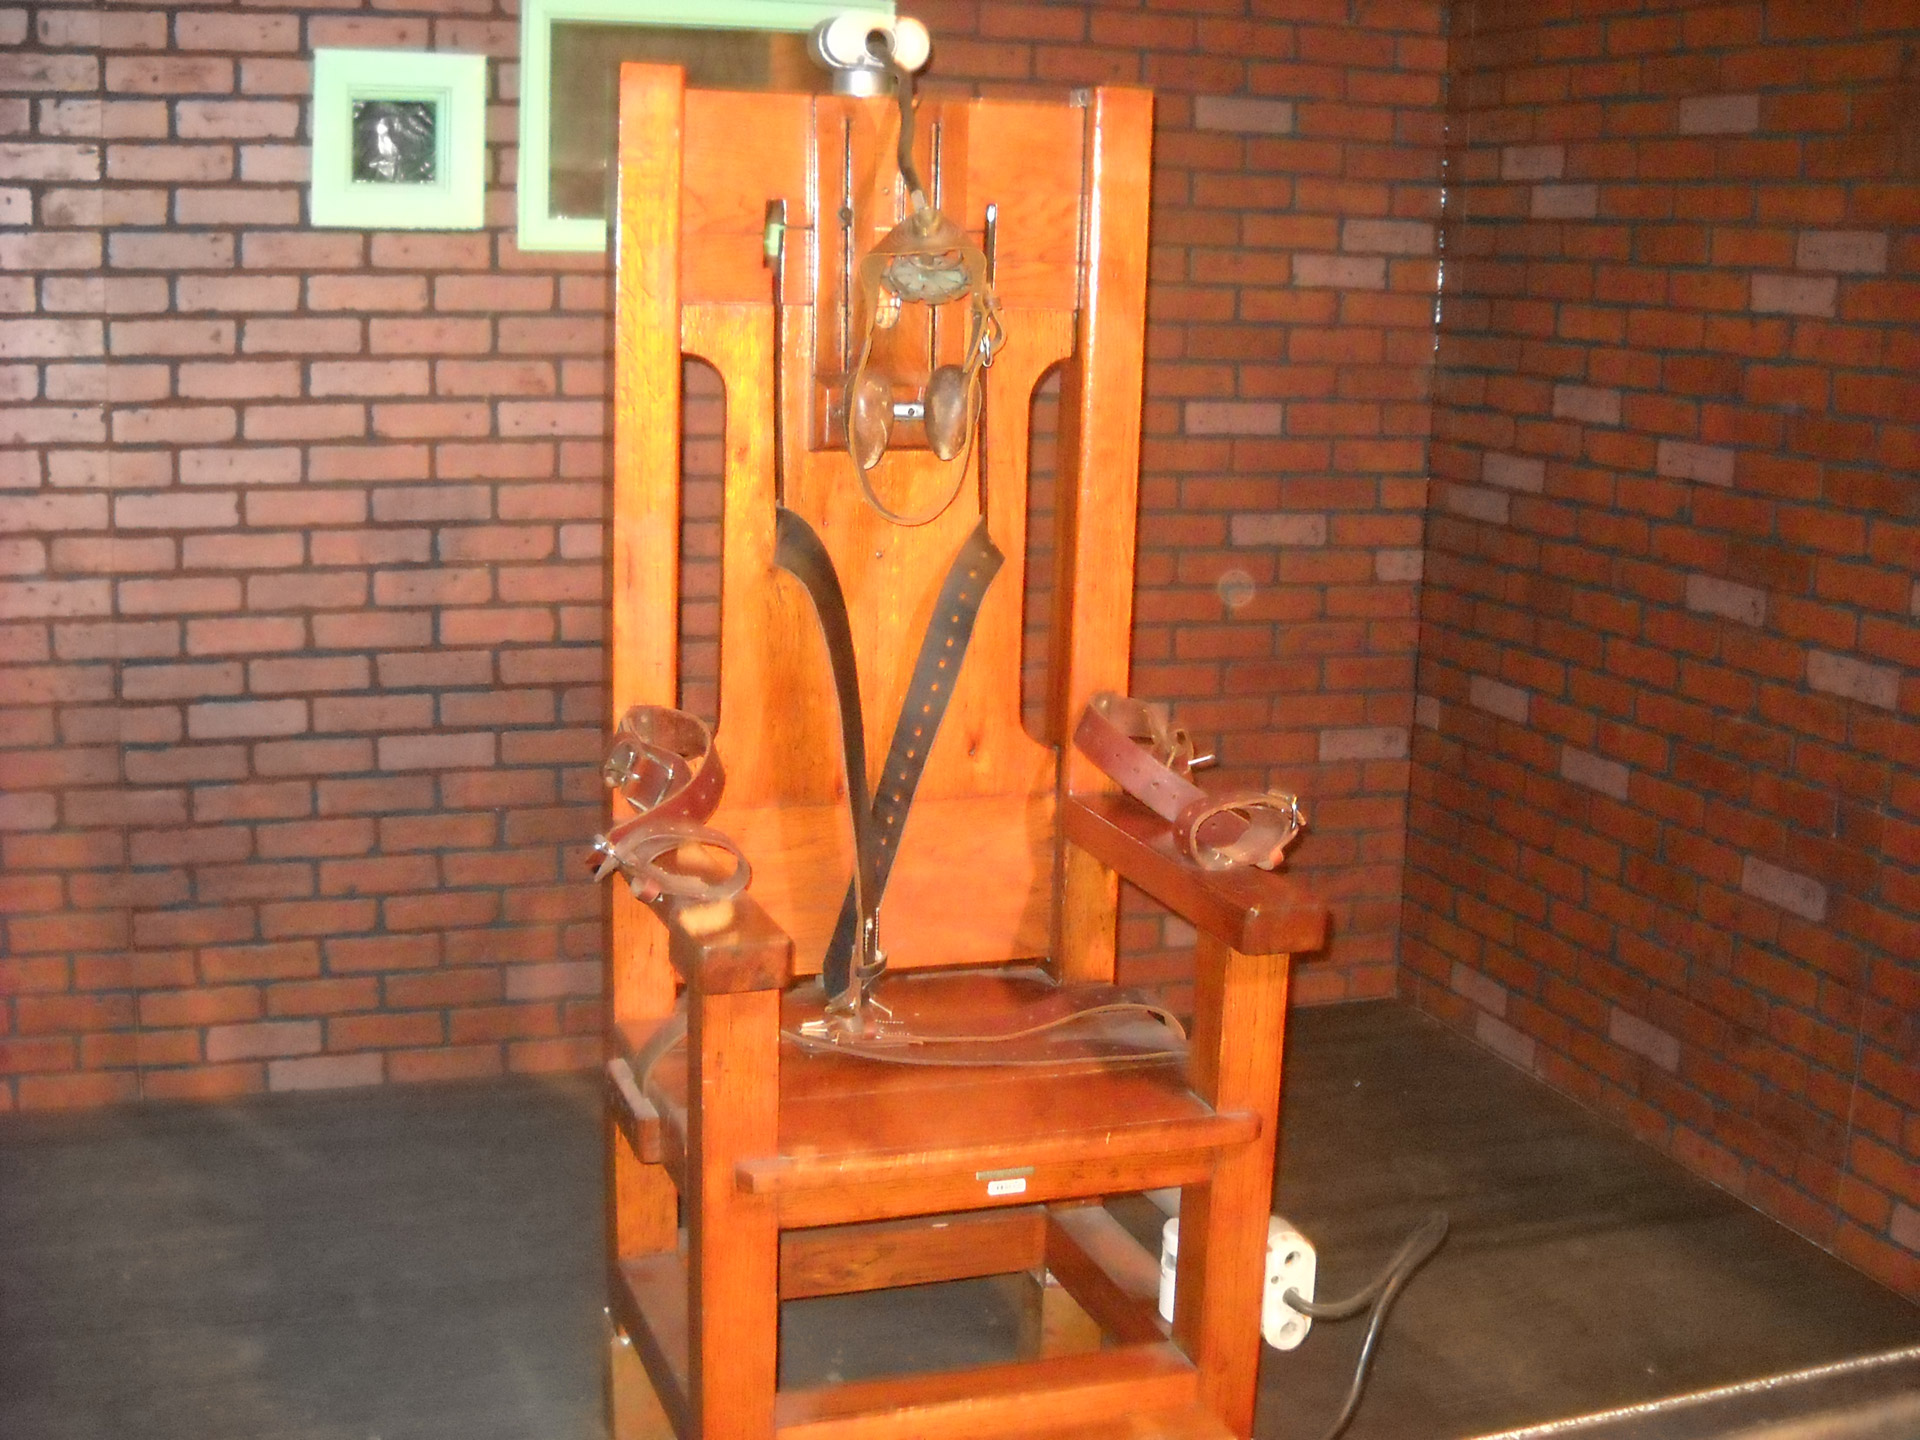 electric-chair-free-stock-photo-public-domain-pictures